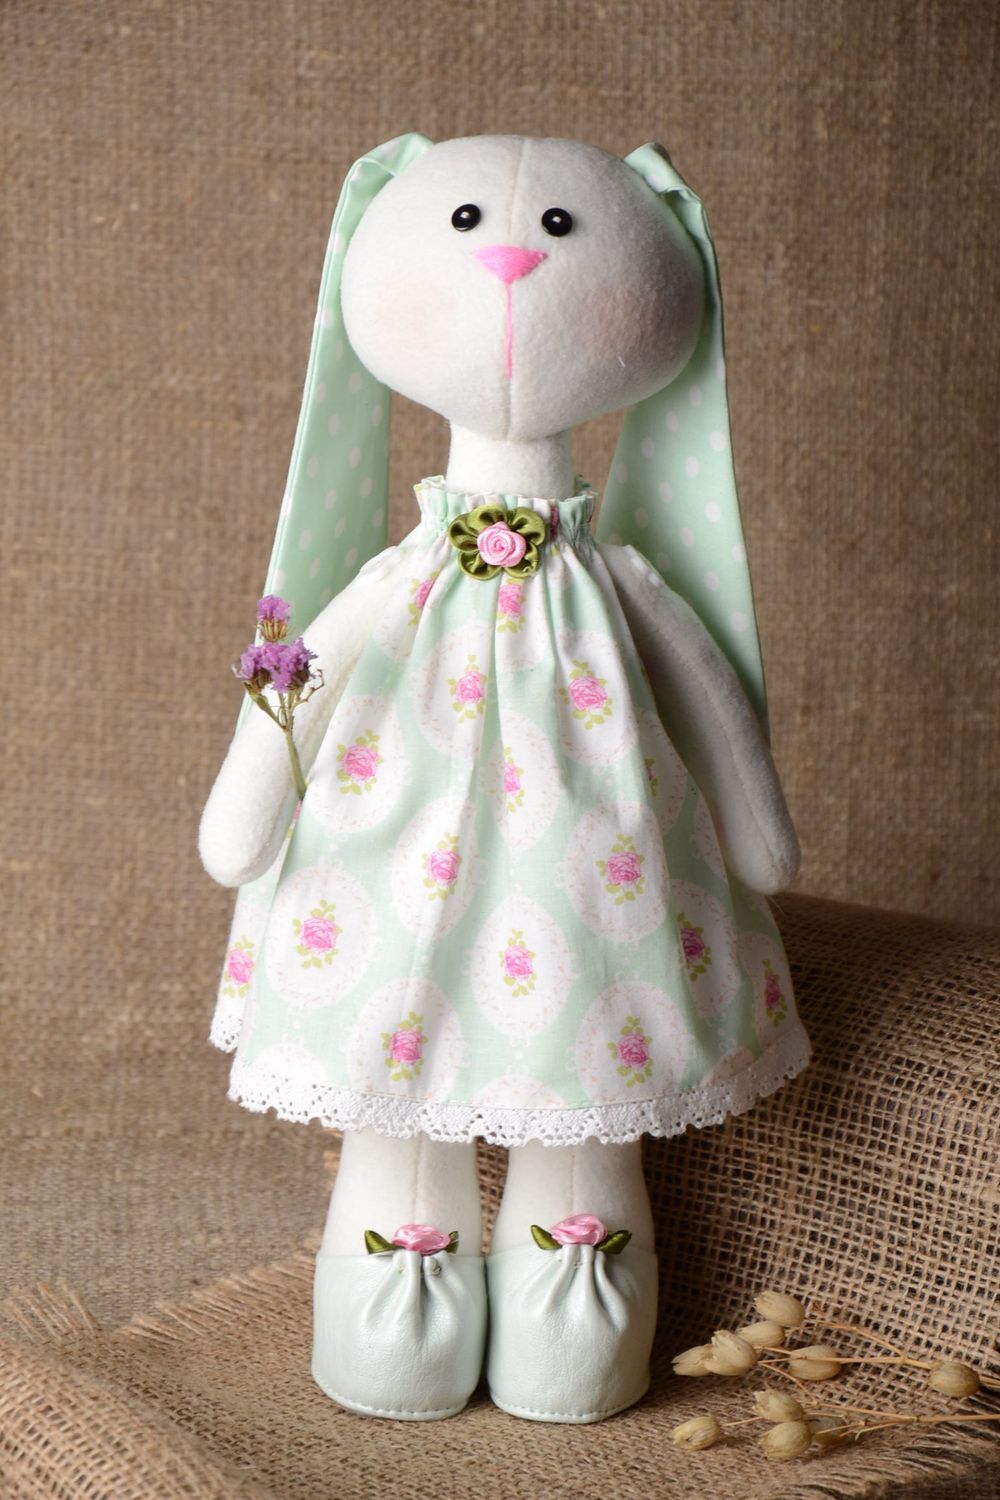 Handmade collectible doll soft doll in dress nursery decor bunny toy for kids photo 1